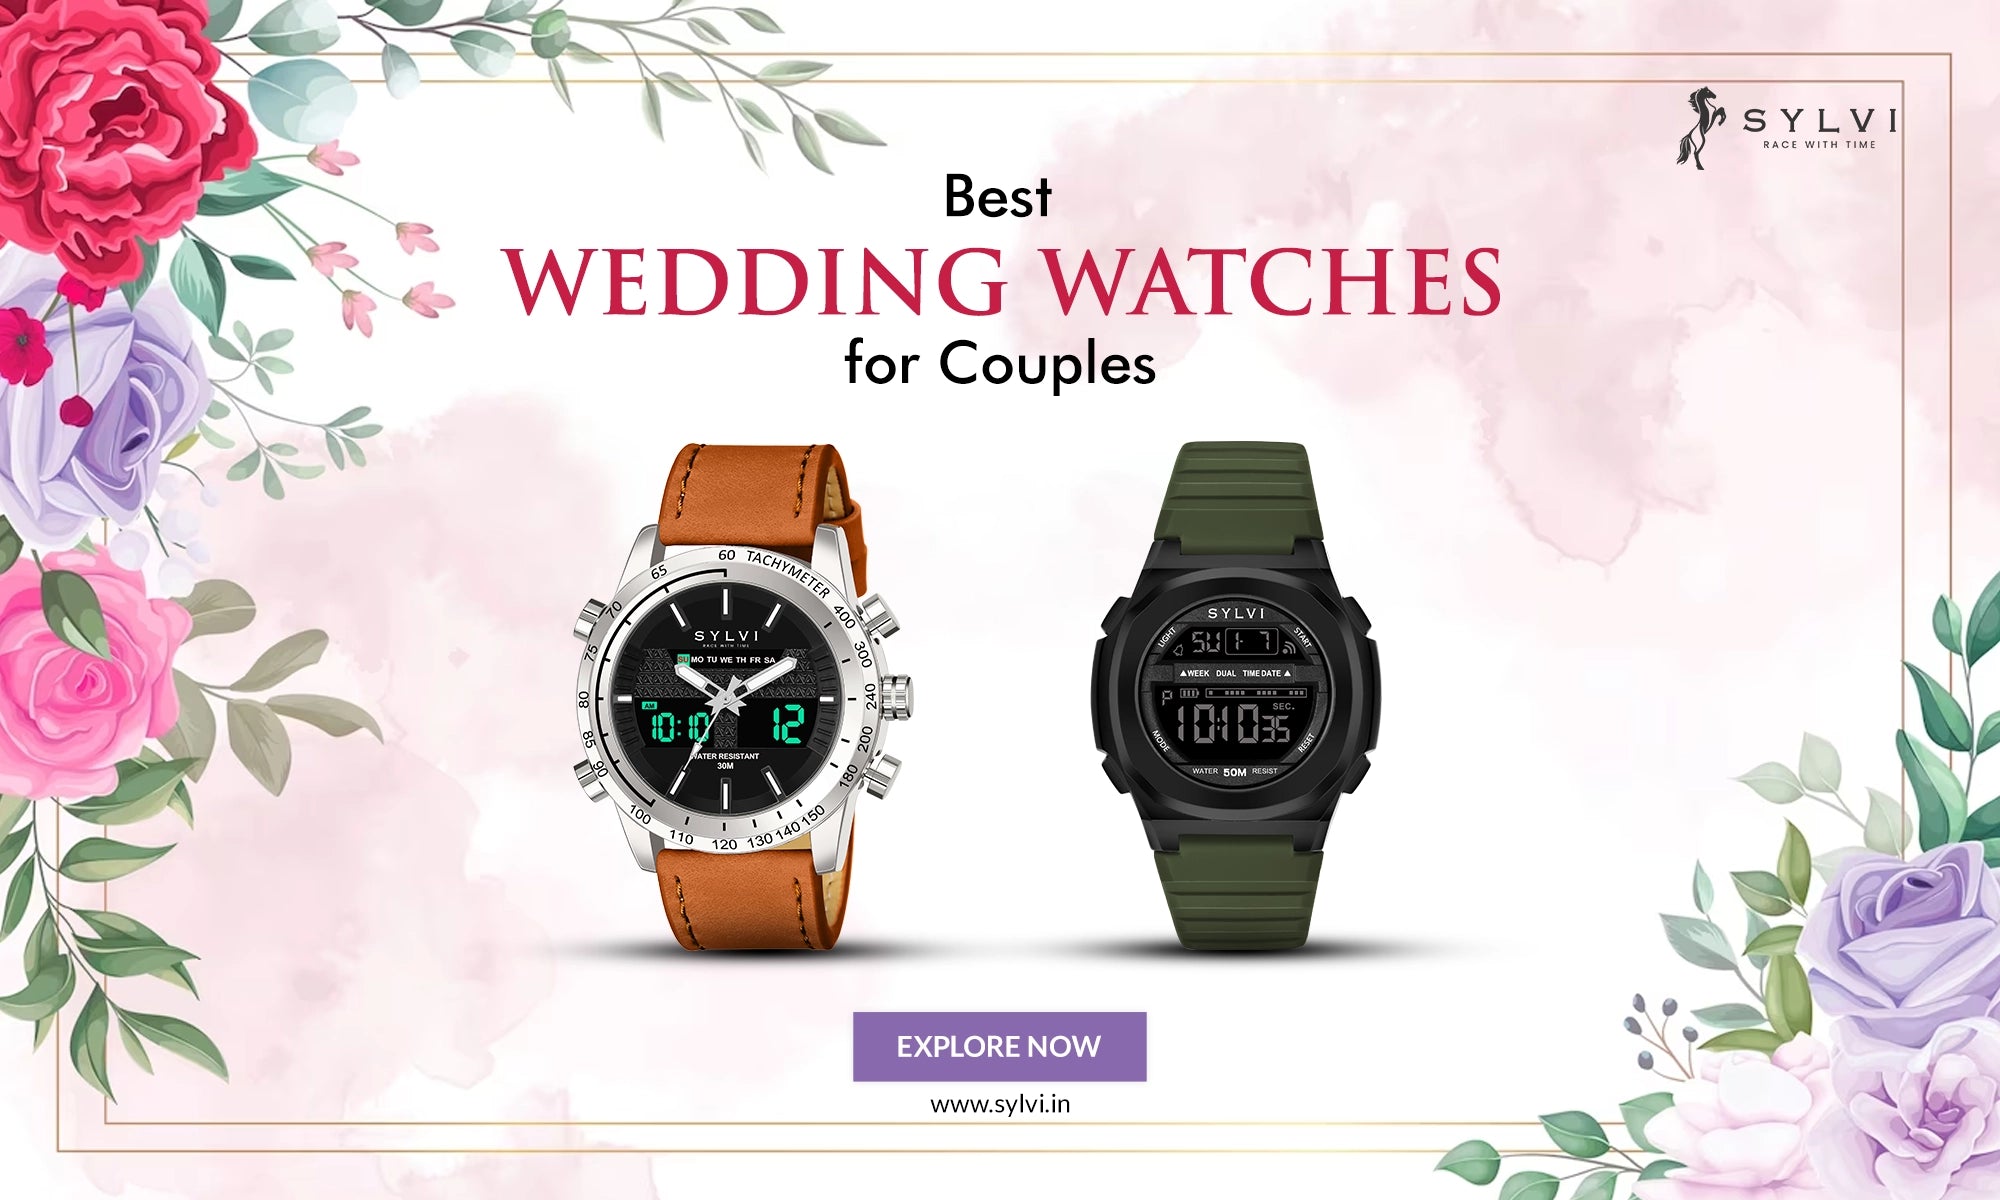 His and Hers Wedding Watches: Coordinating Watches for Couples